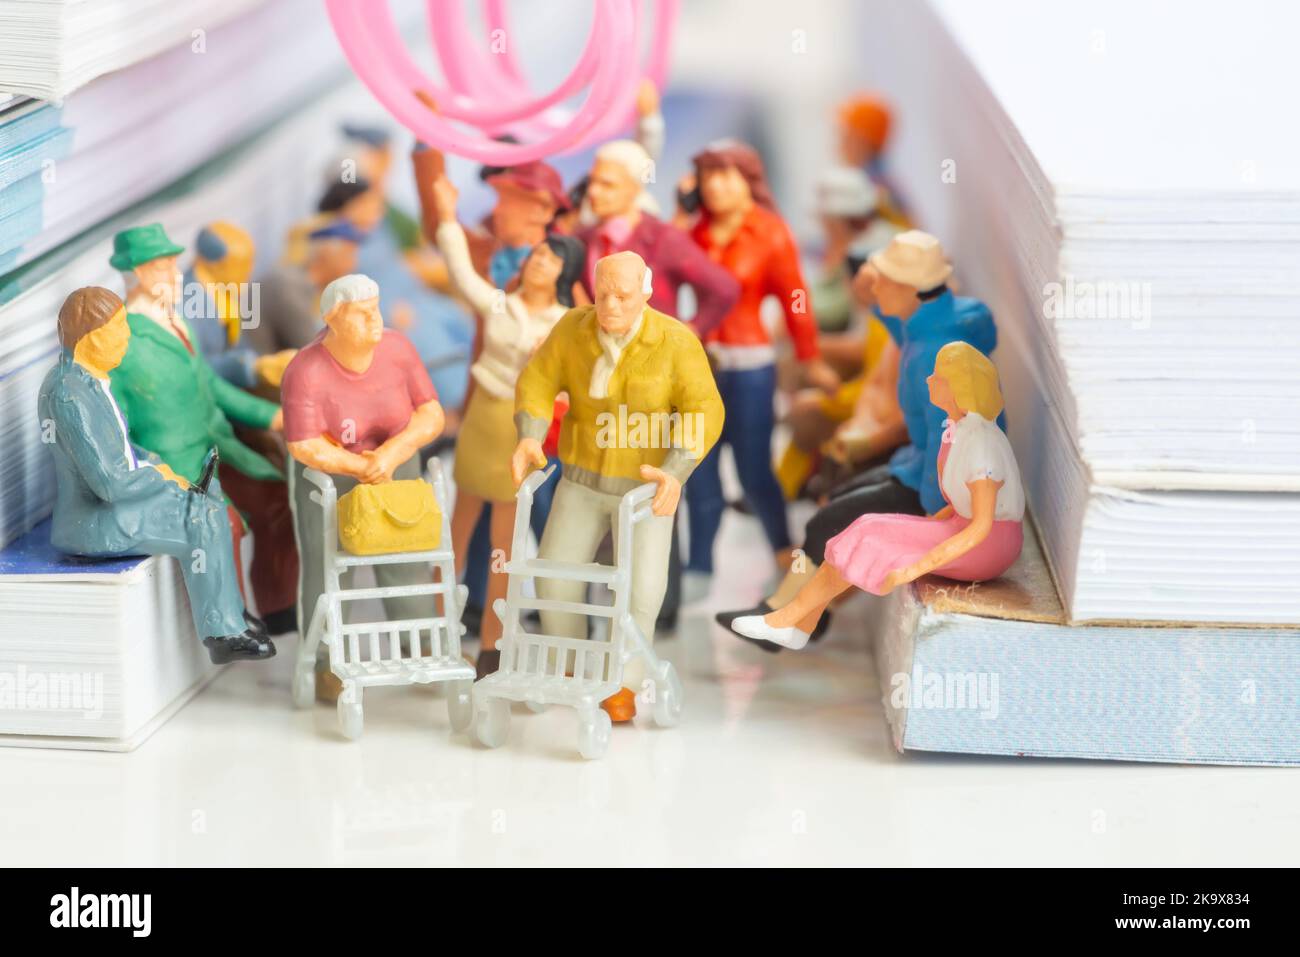 Miniature toy of couple of senior citizen on a public transport concept - travel on a train or bus. Stock Photo